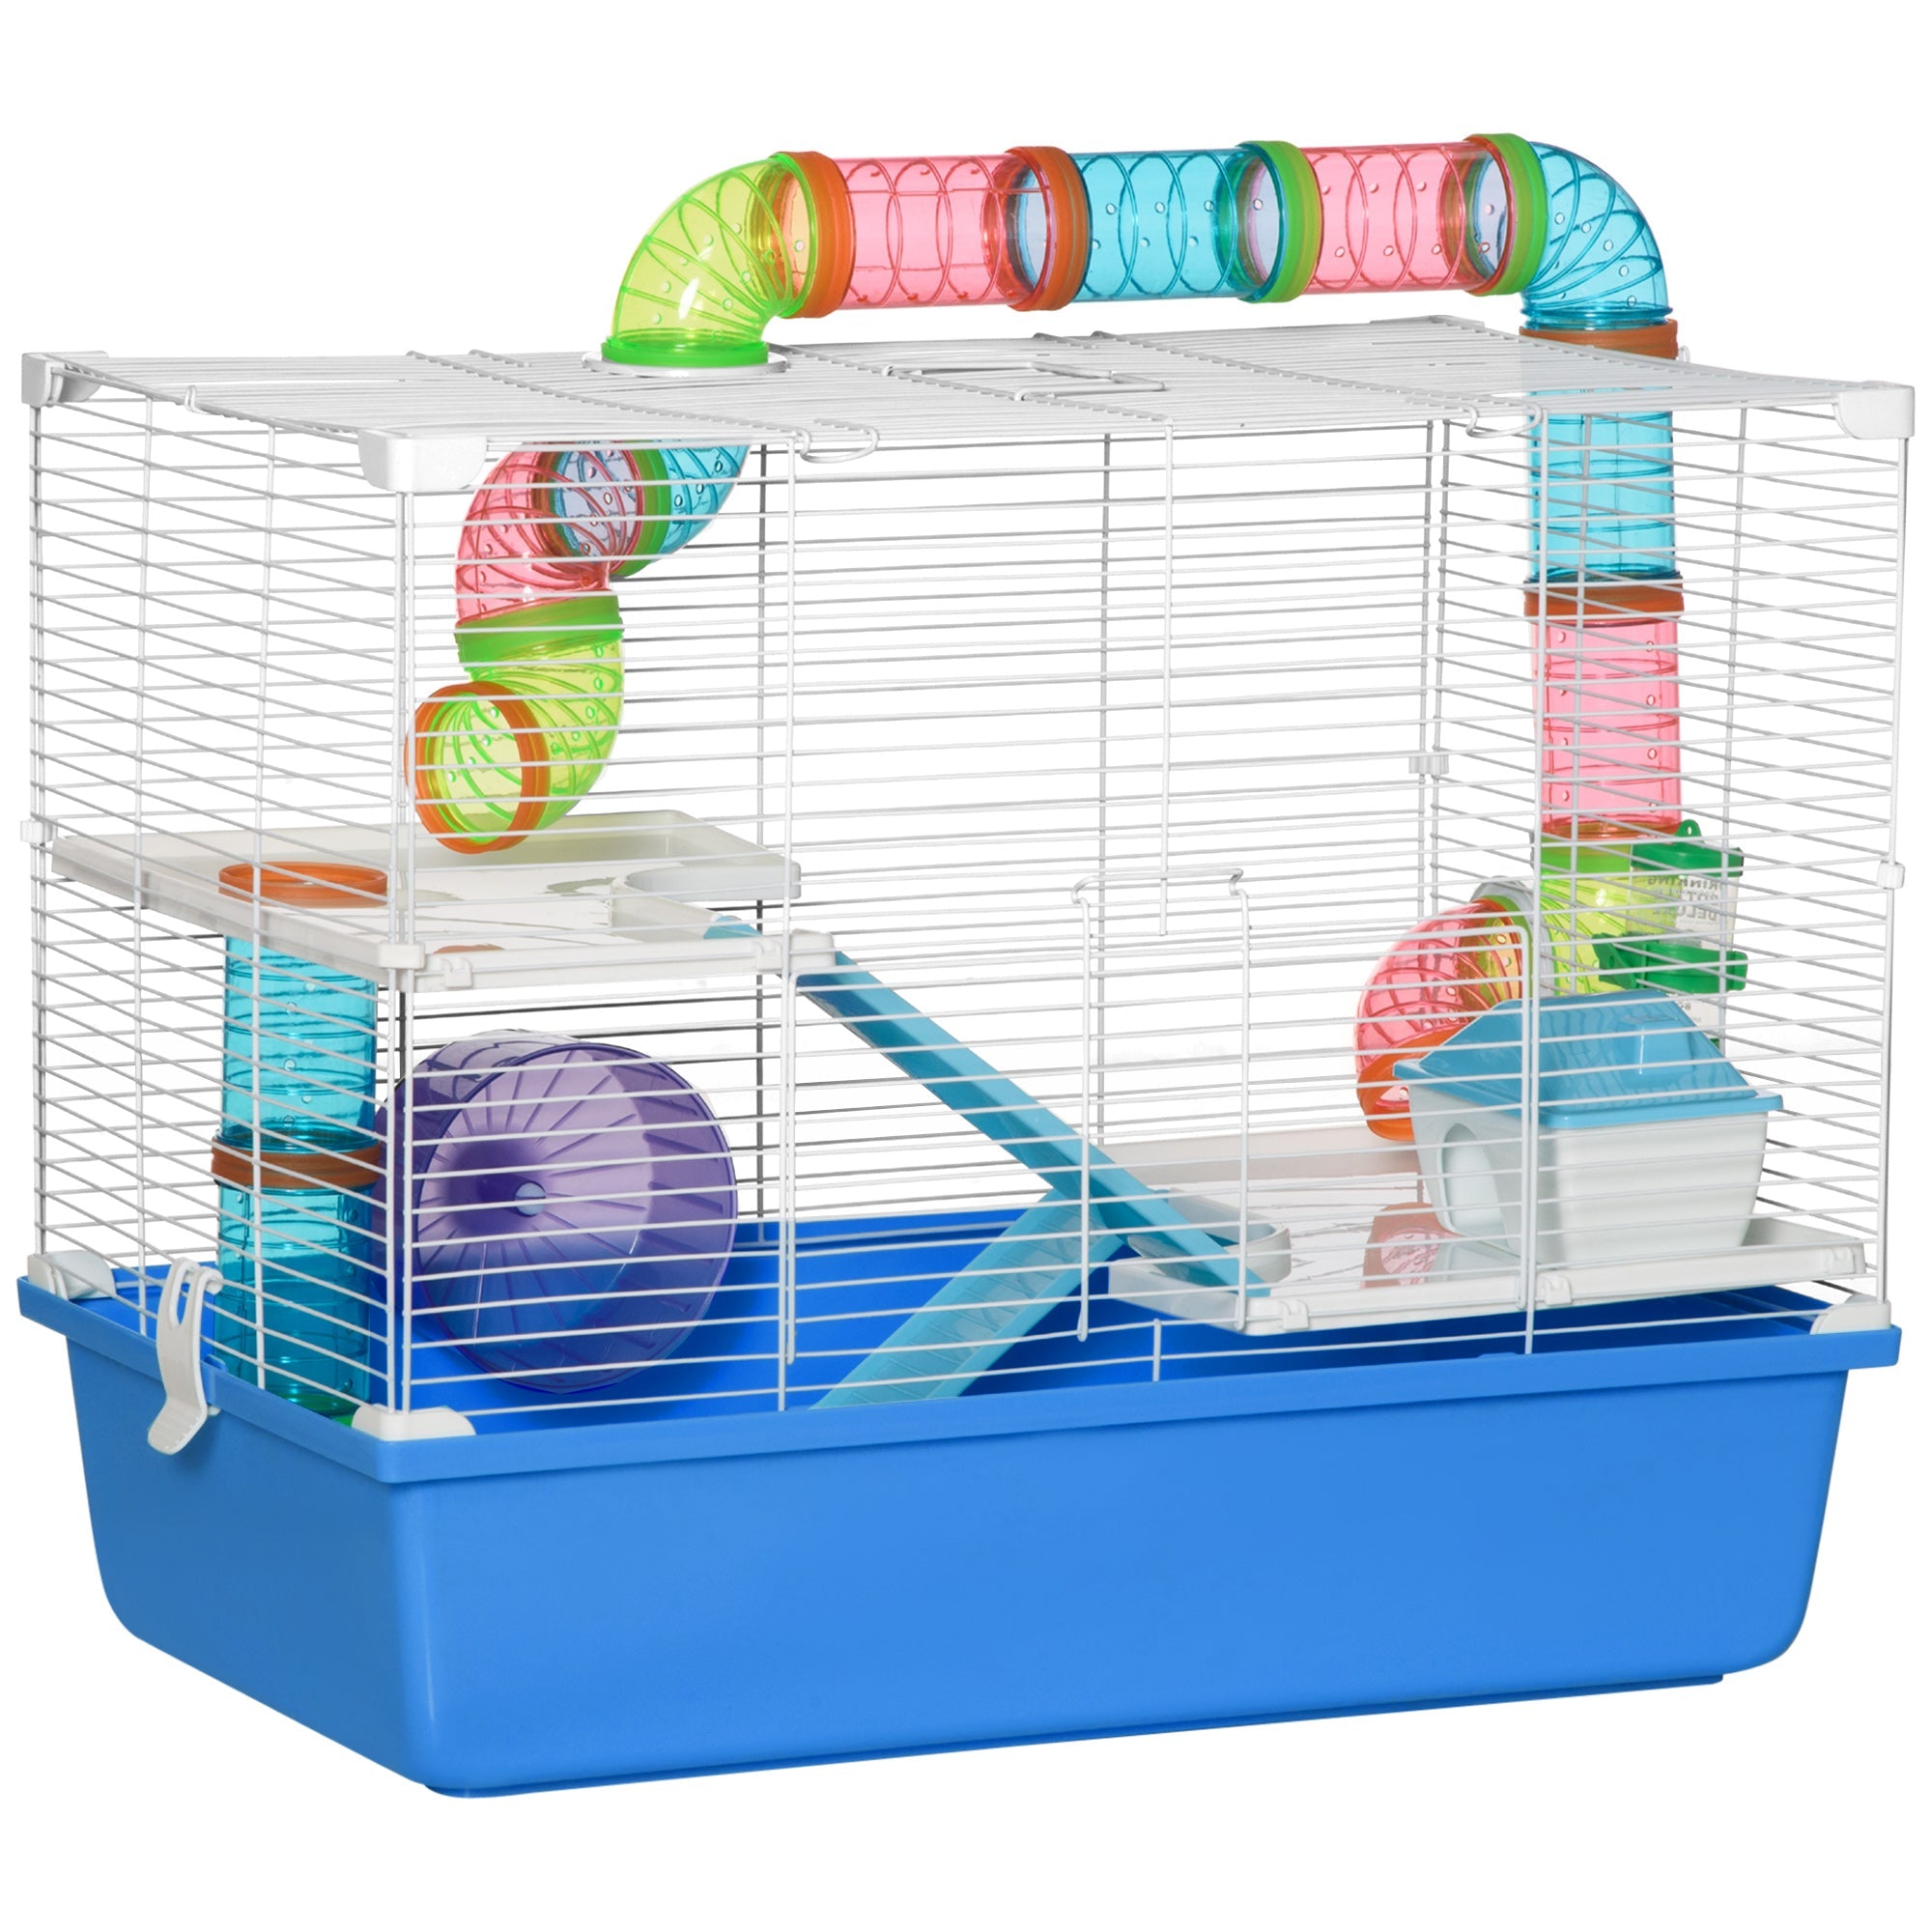 Large Hamster Cage, 3-Level Small Rodents House, with Tube Tunnel, Exercise Wheel, Water Bottle, Food Dish, Ramps, Hut, 59 x 36 x 47 cm, Blue-0